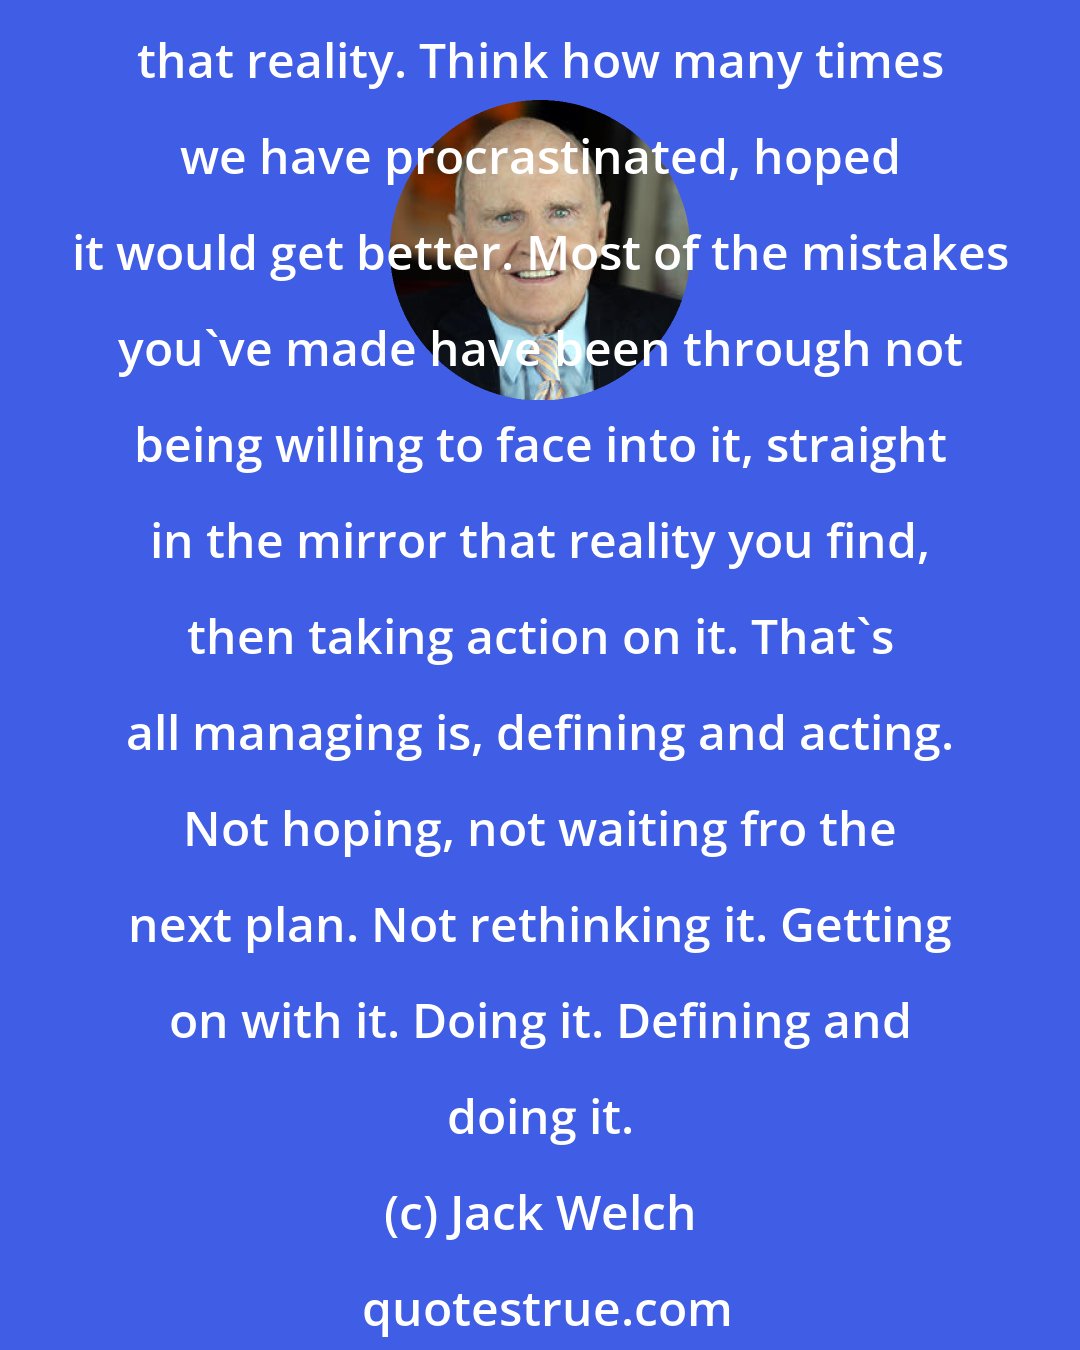 Jack Welch: The art of managing and leading comes down to a simple thing. Determining and facing reality about people, situations, products, and then acting decisively and quickly on that reality. Think how many times we have procrastinated, hoped it would get better. Most of the mistakes you've made have been through not being willing to face into it, straight in the mirror that reality you find, then taking action on it. That's all managing is, defining and acting. Not hoping, not waiting fro the next plan. Not rethinking it. Getting on with it. Doing it. Defining and doing it.